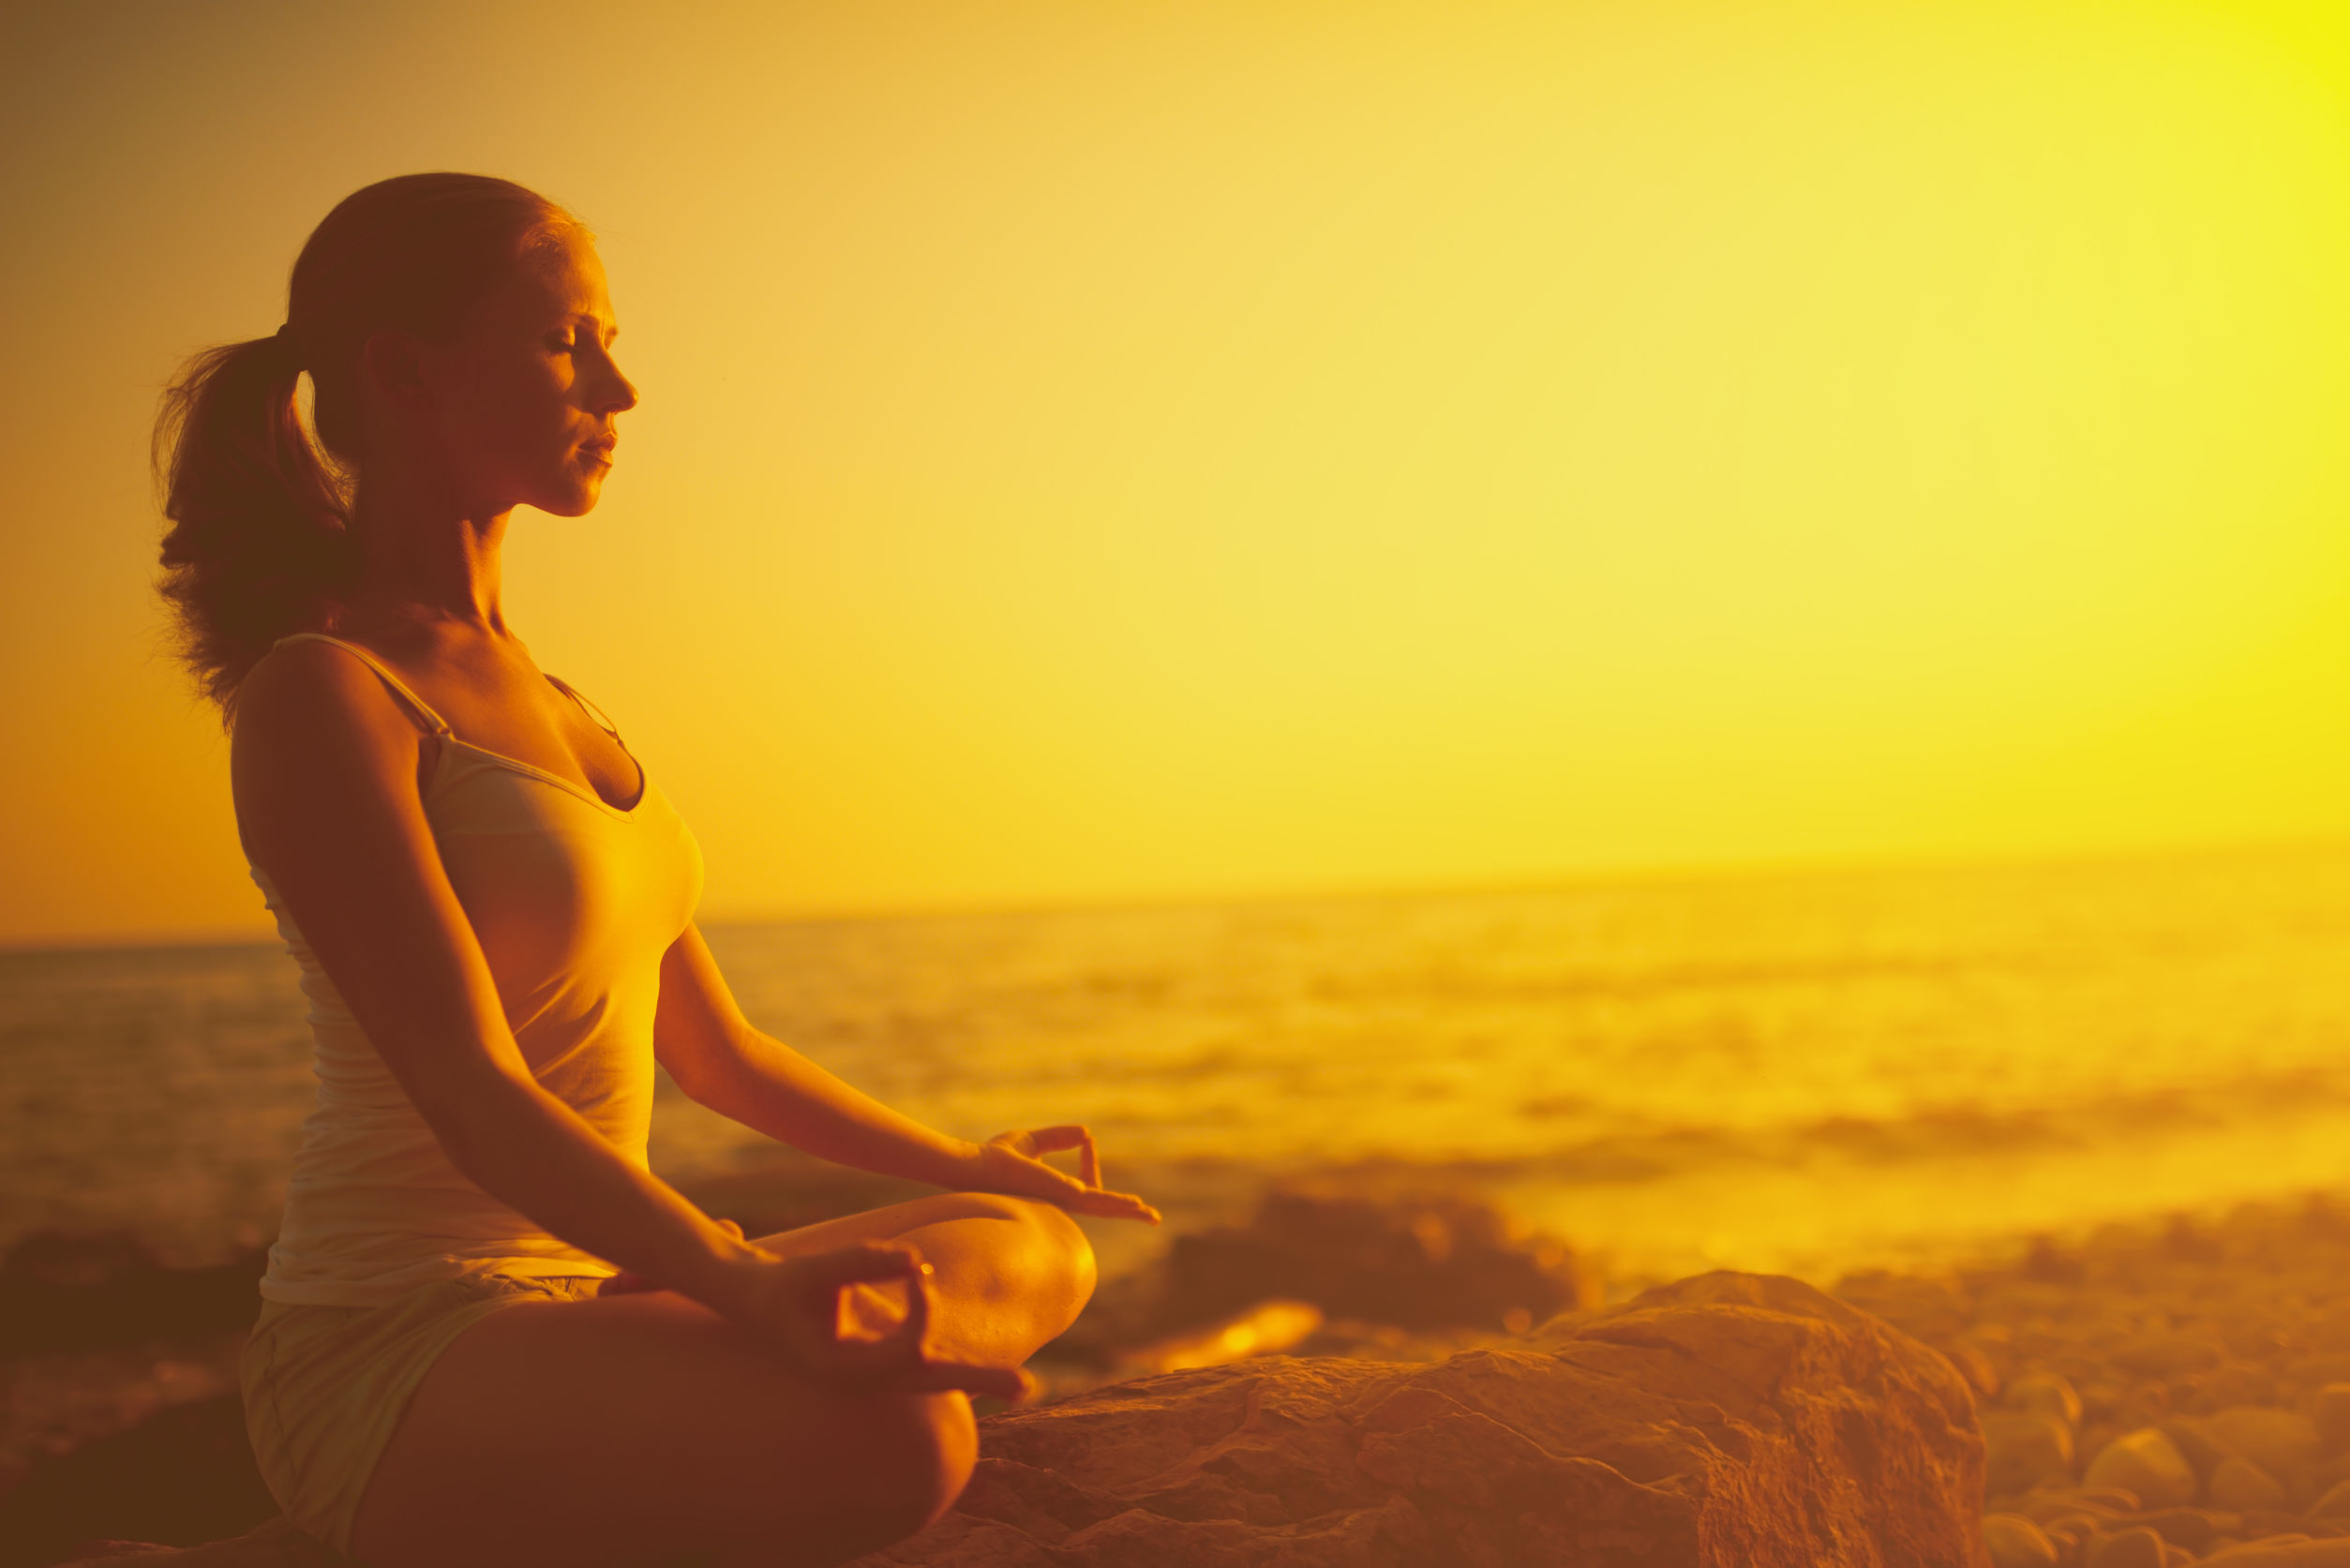 Meditation: A Powerful Tool or Touchy-Feely Crap?